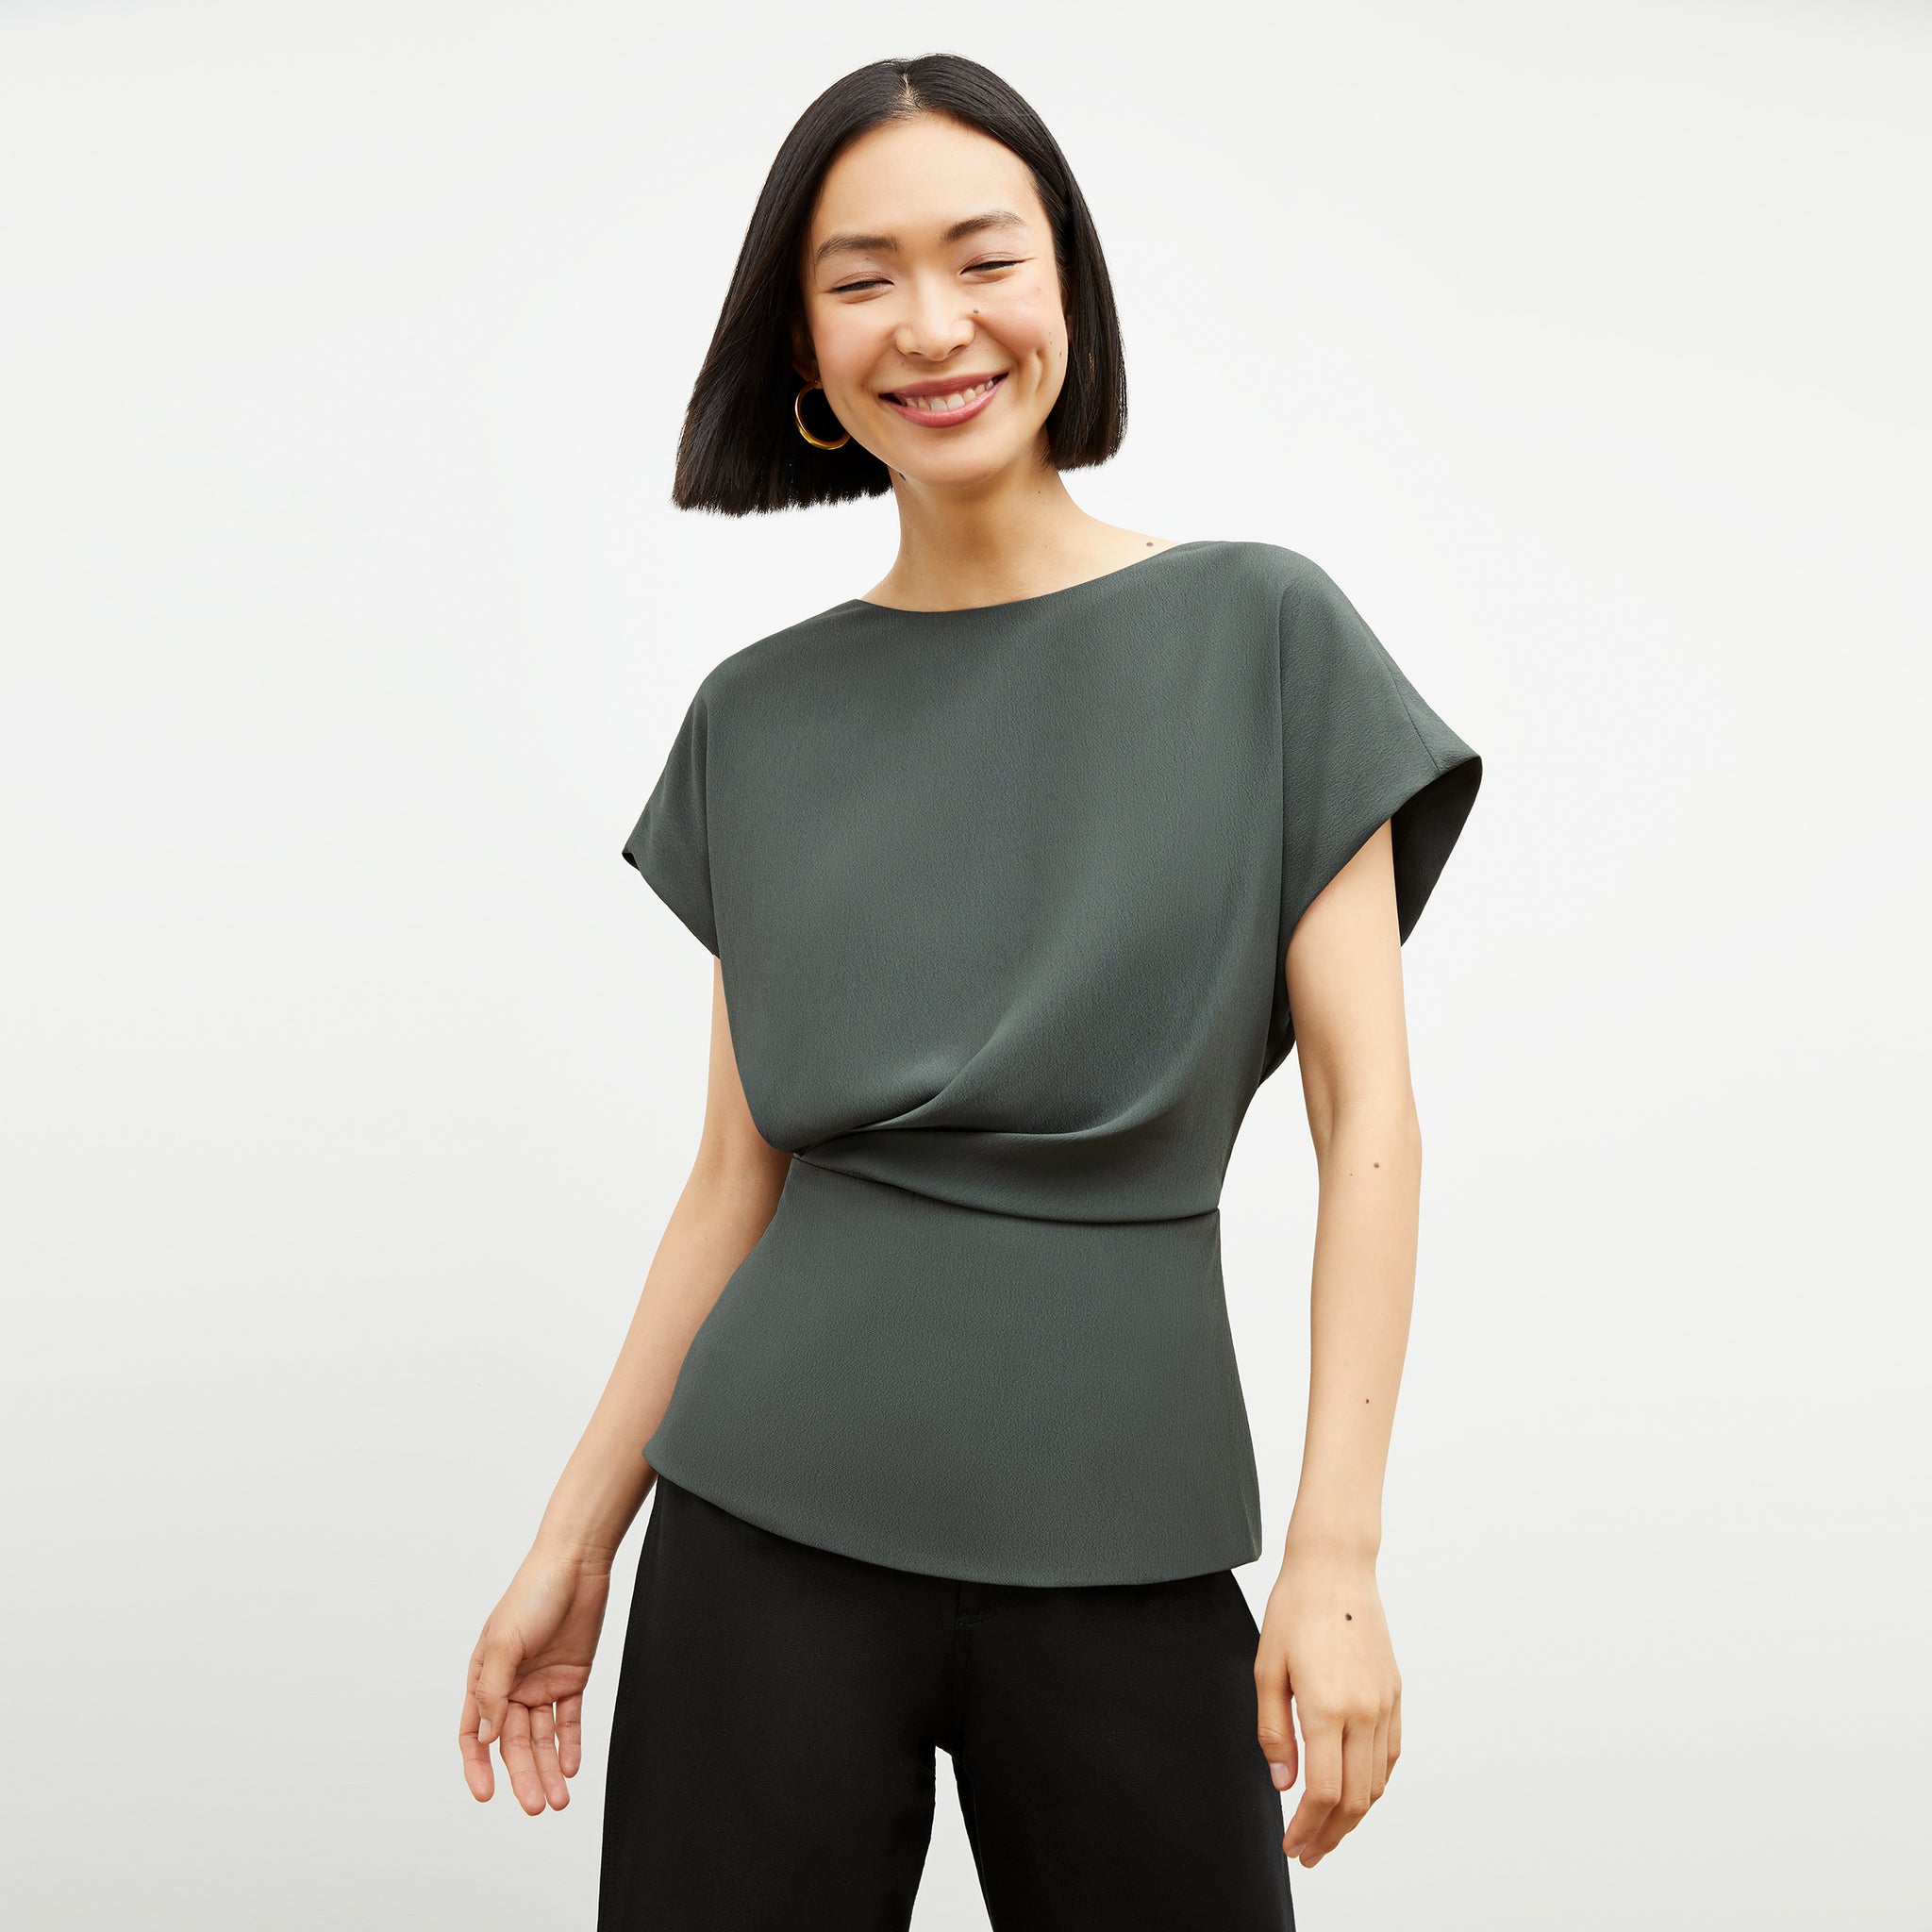 Front image of a woman wearing the Nejvi Top in Aloe 